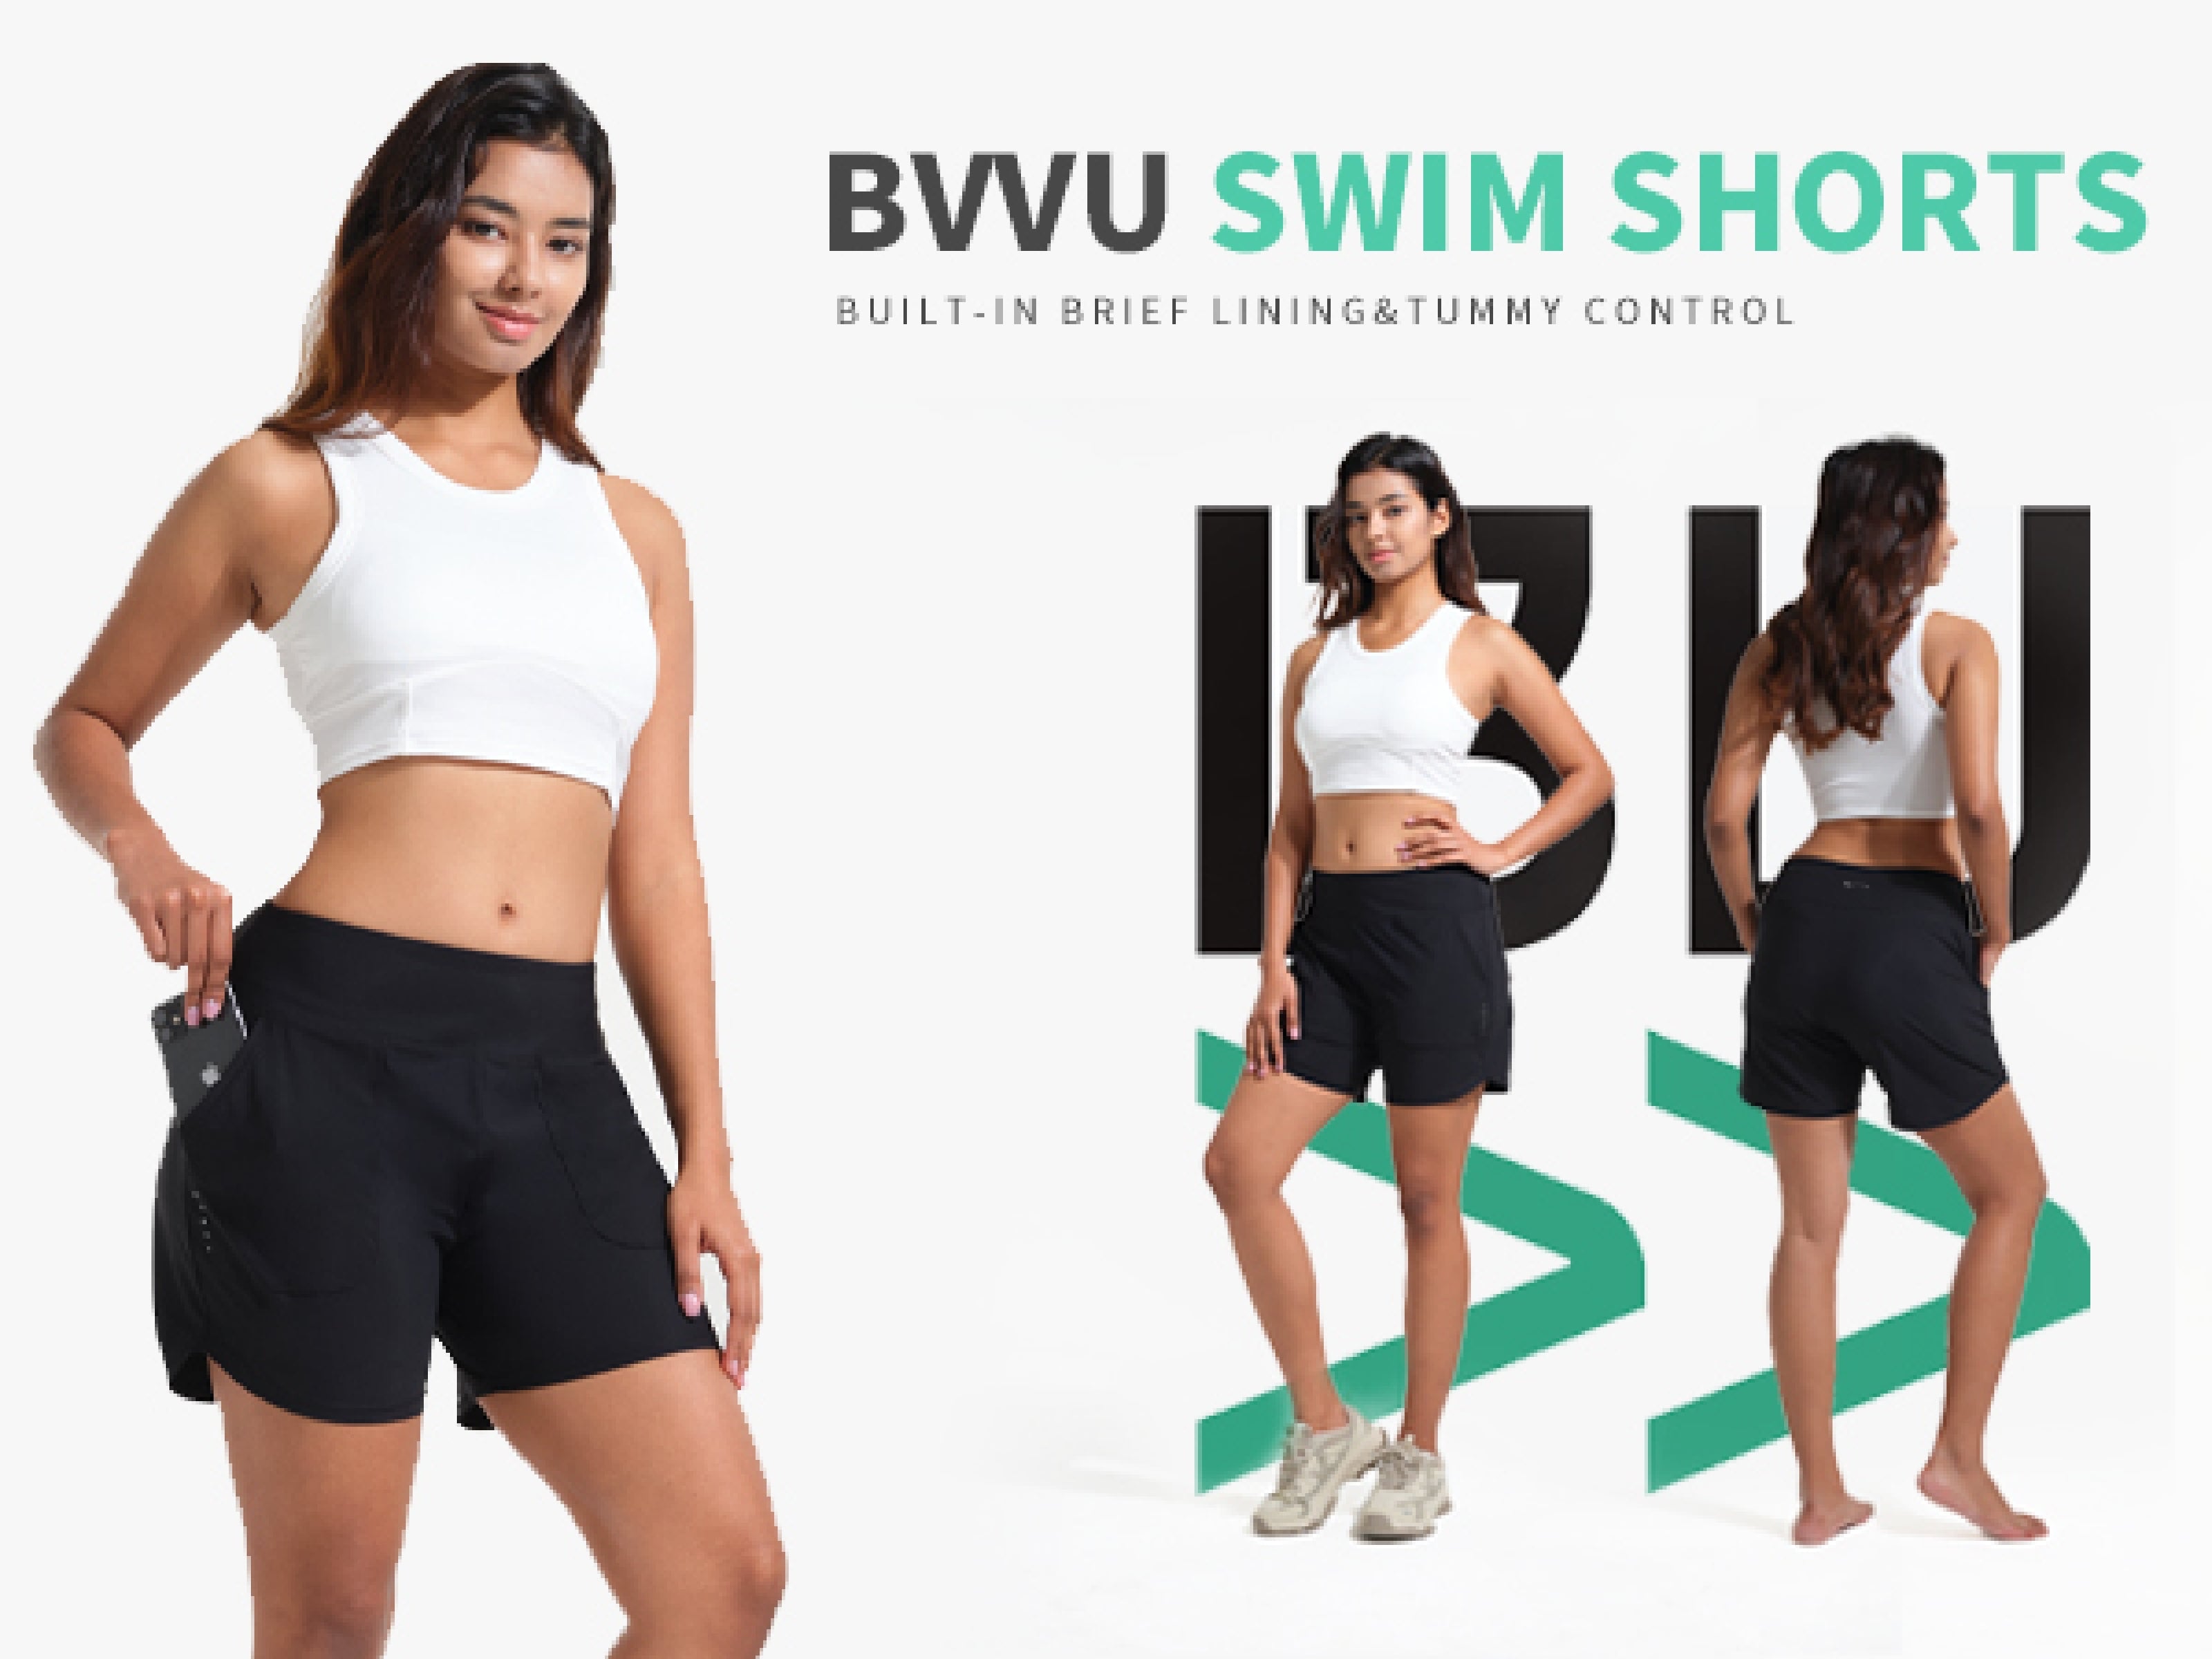 BVVU Women's 5 inch Swim Board Shorts Tummy Control Swimsuit Bottoms UPF50+ High Waisted Beach Shorts for Women with Liner